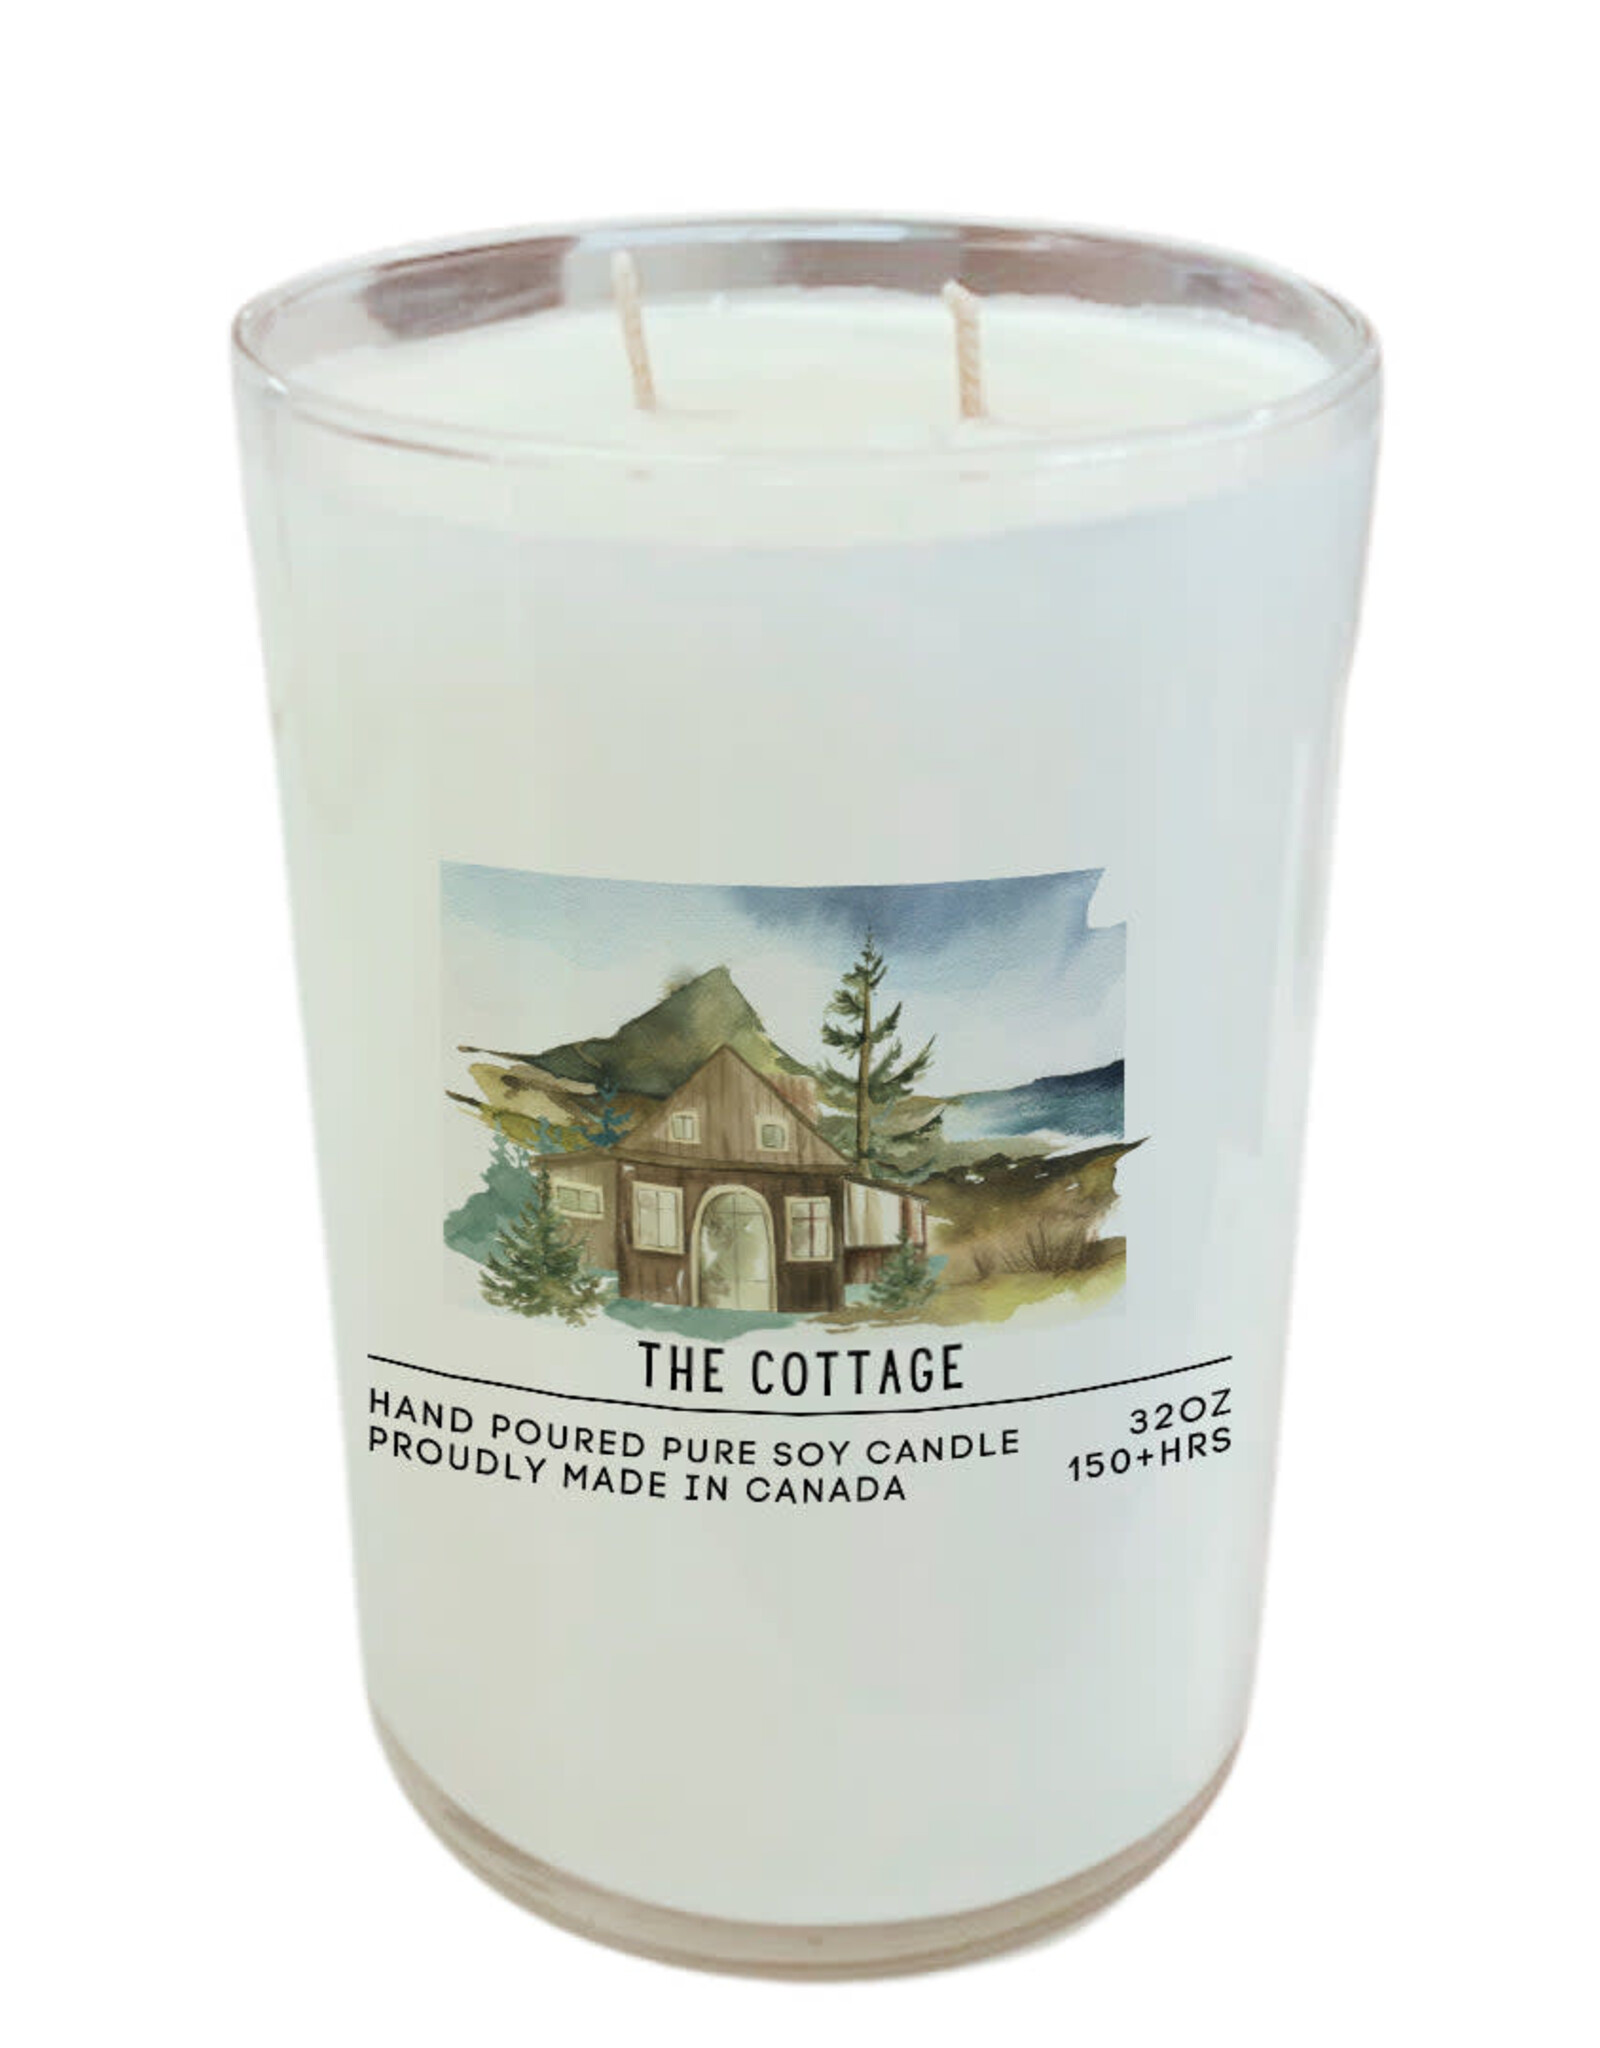 Serendipity Soy Candles 32oz 2 Wick Jar Candle - The Cottage